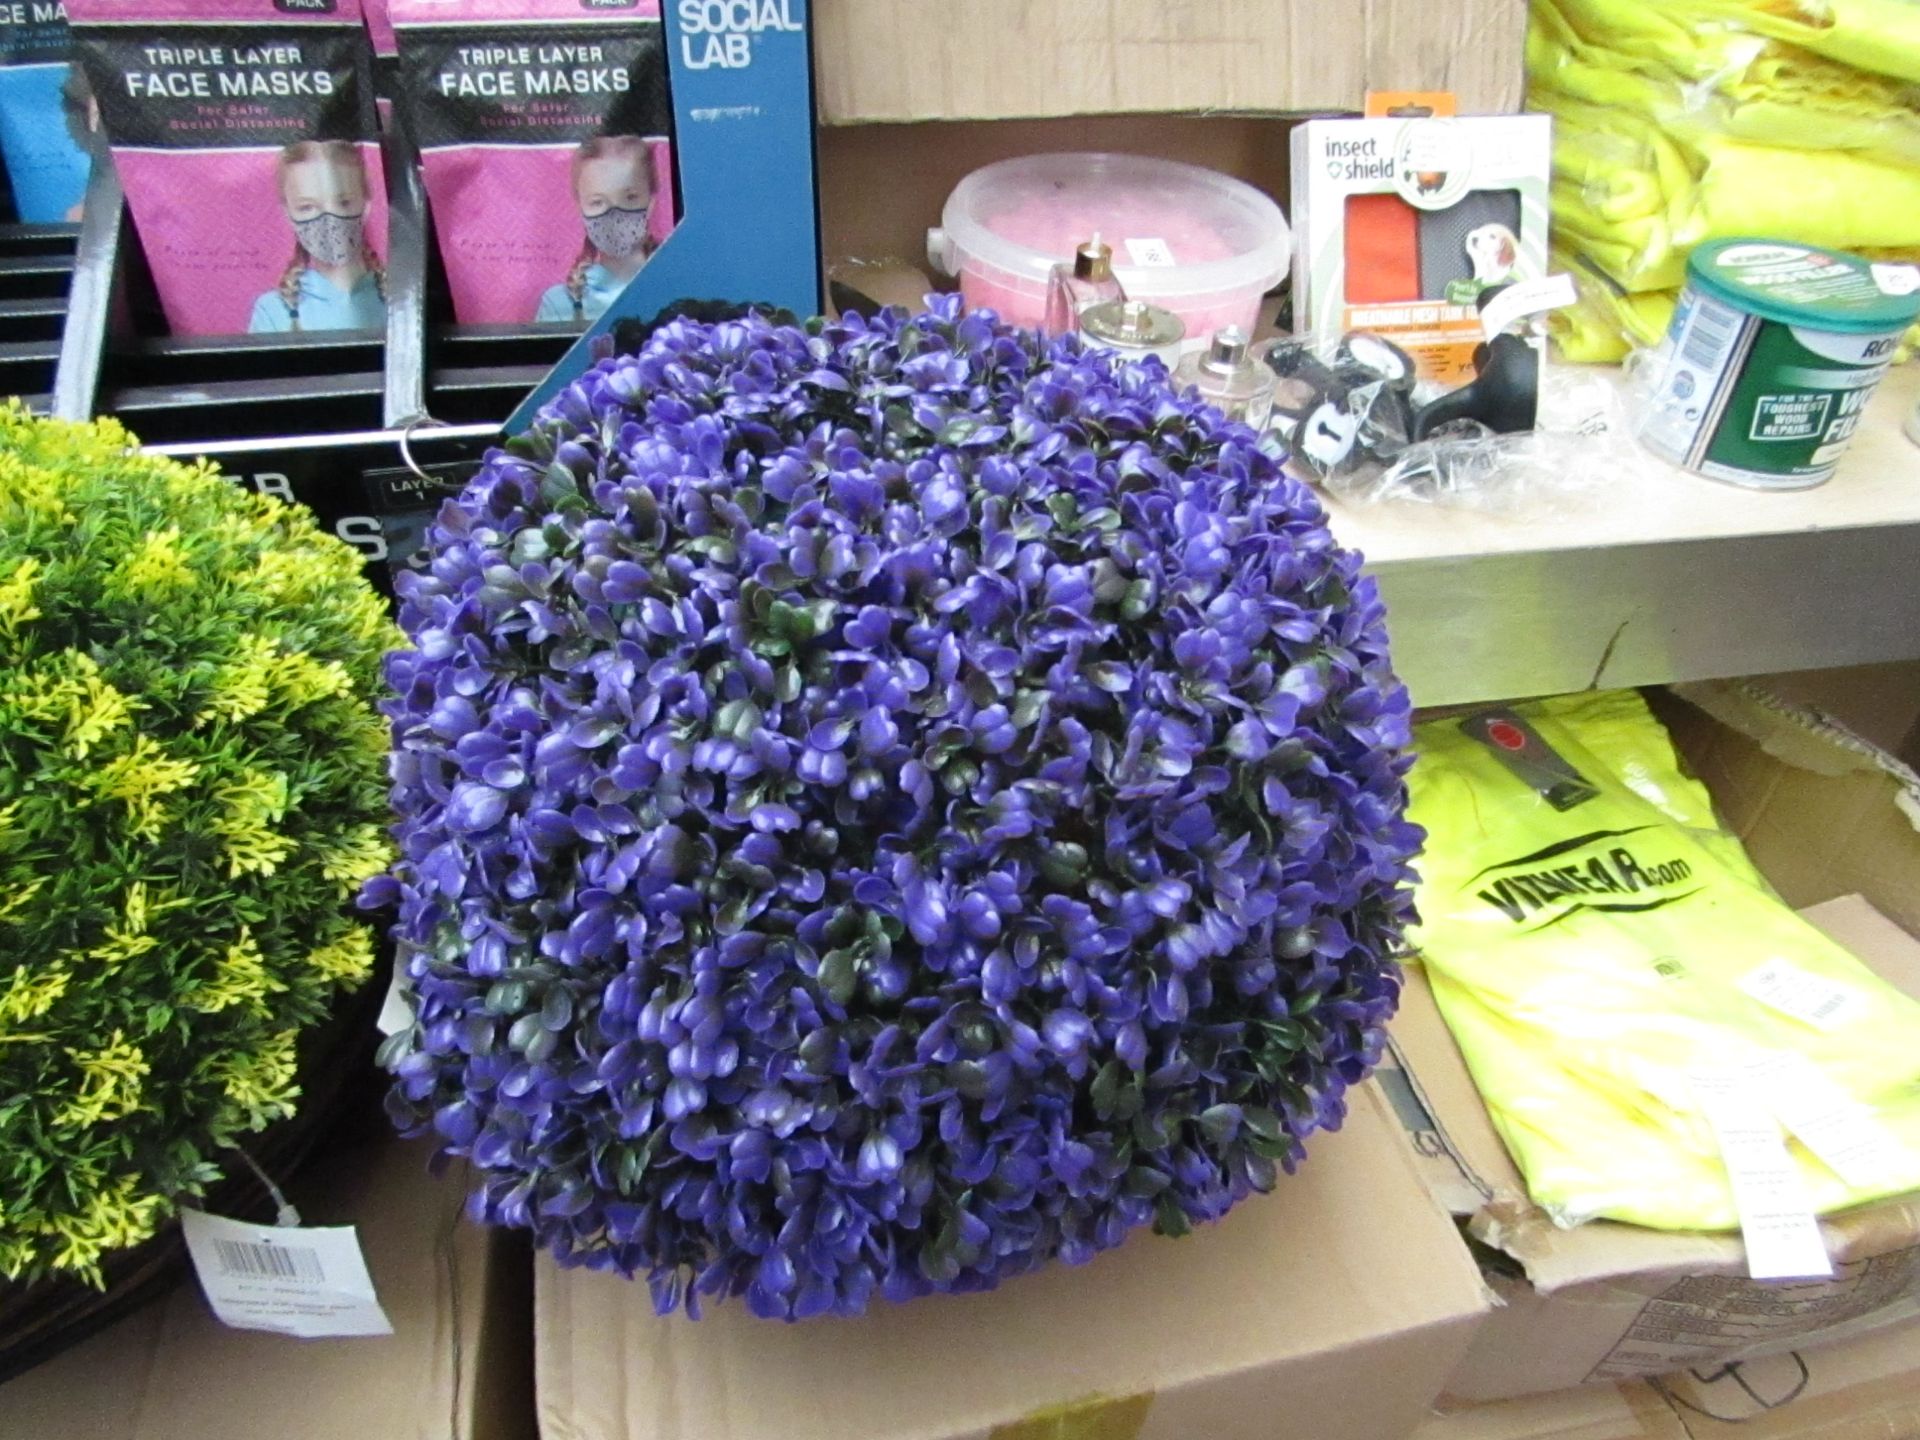 Flower Topiary Garden Ball 12" - Unused & Boxed. - Please See See Image For Design.